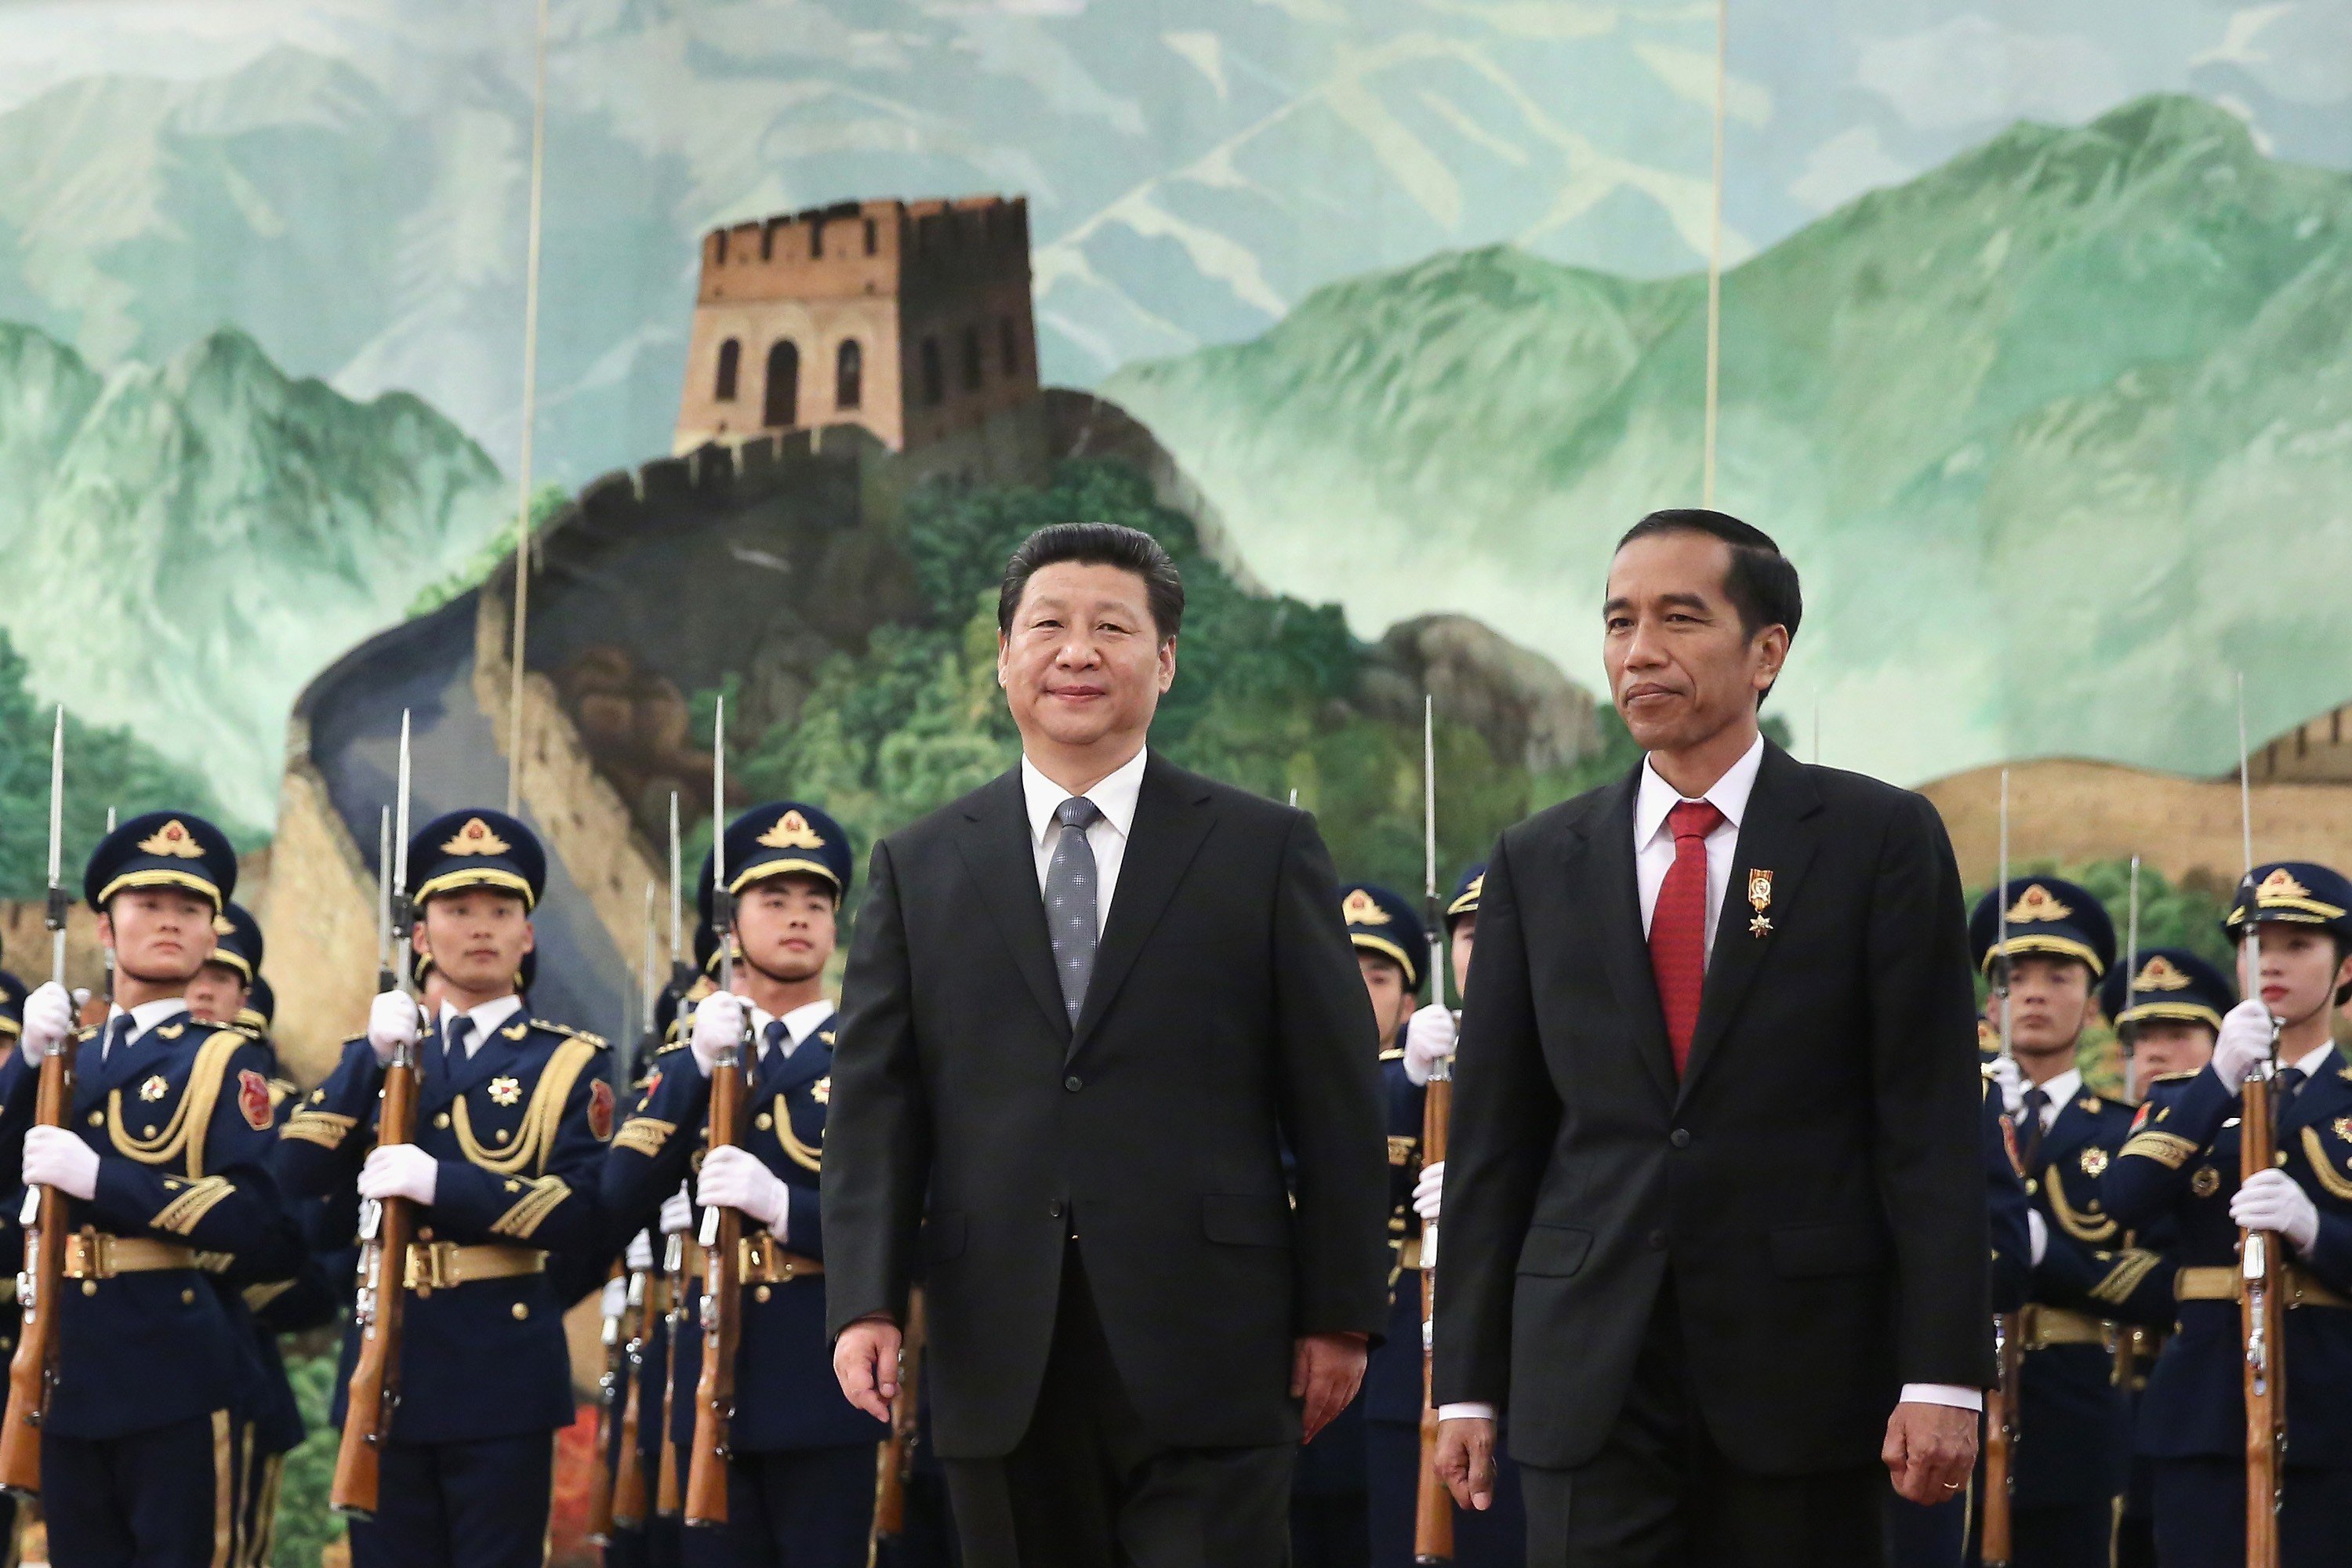 Chinese President Xi Jinping and Indonesia's President Joko Widodo at the Great Hall of the People in Beijing. Photo: AFP